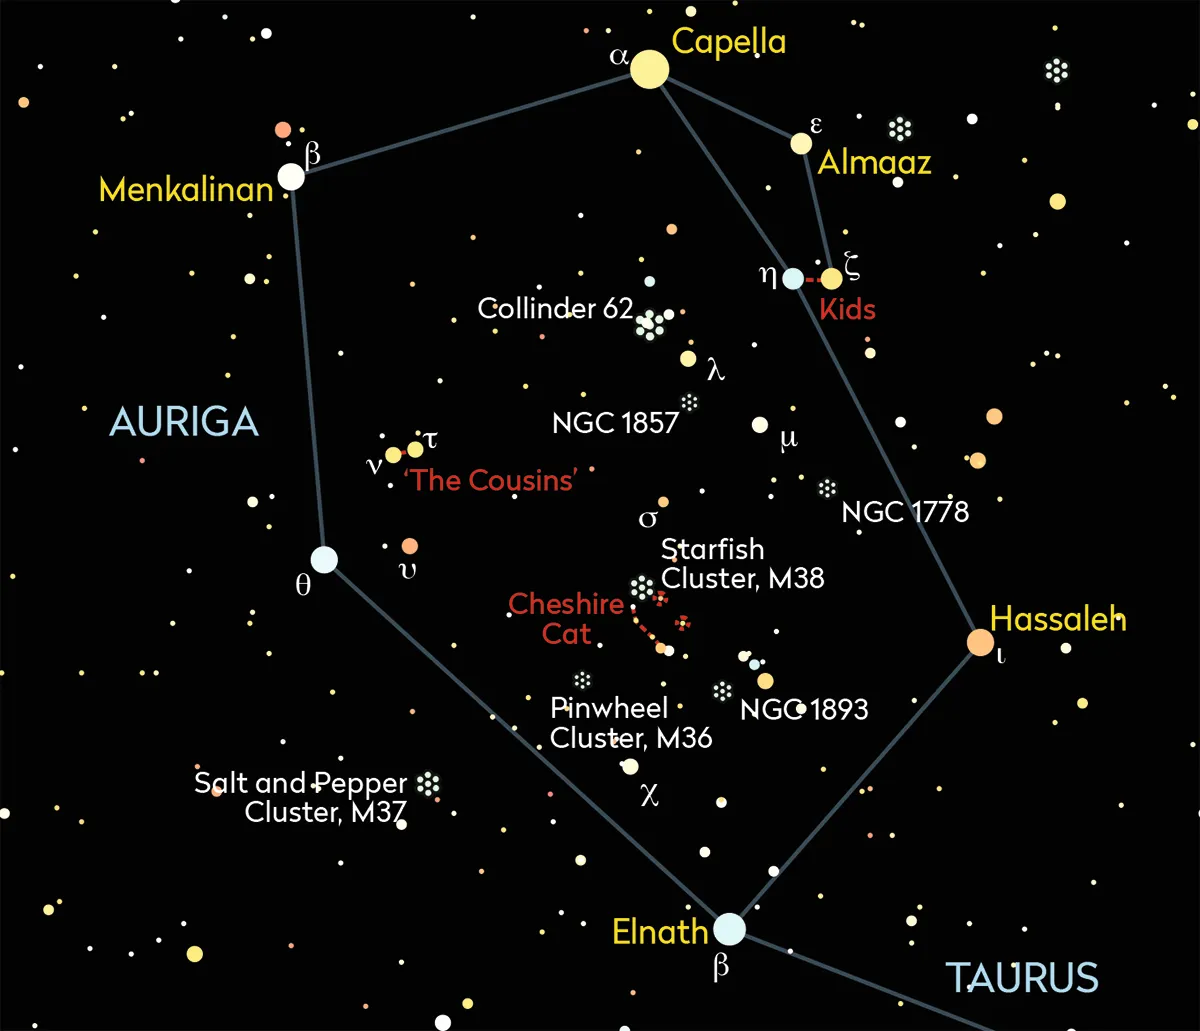 A chart showing the stars of the Auriga constellation